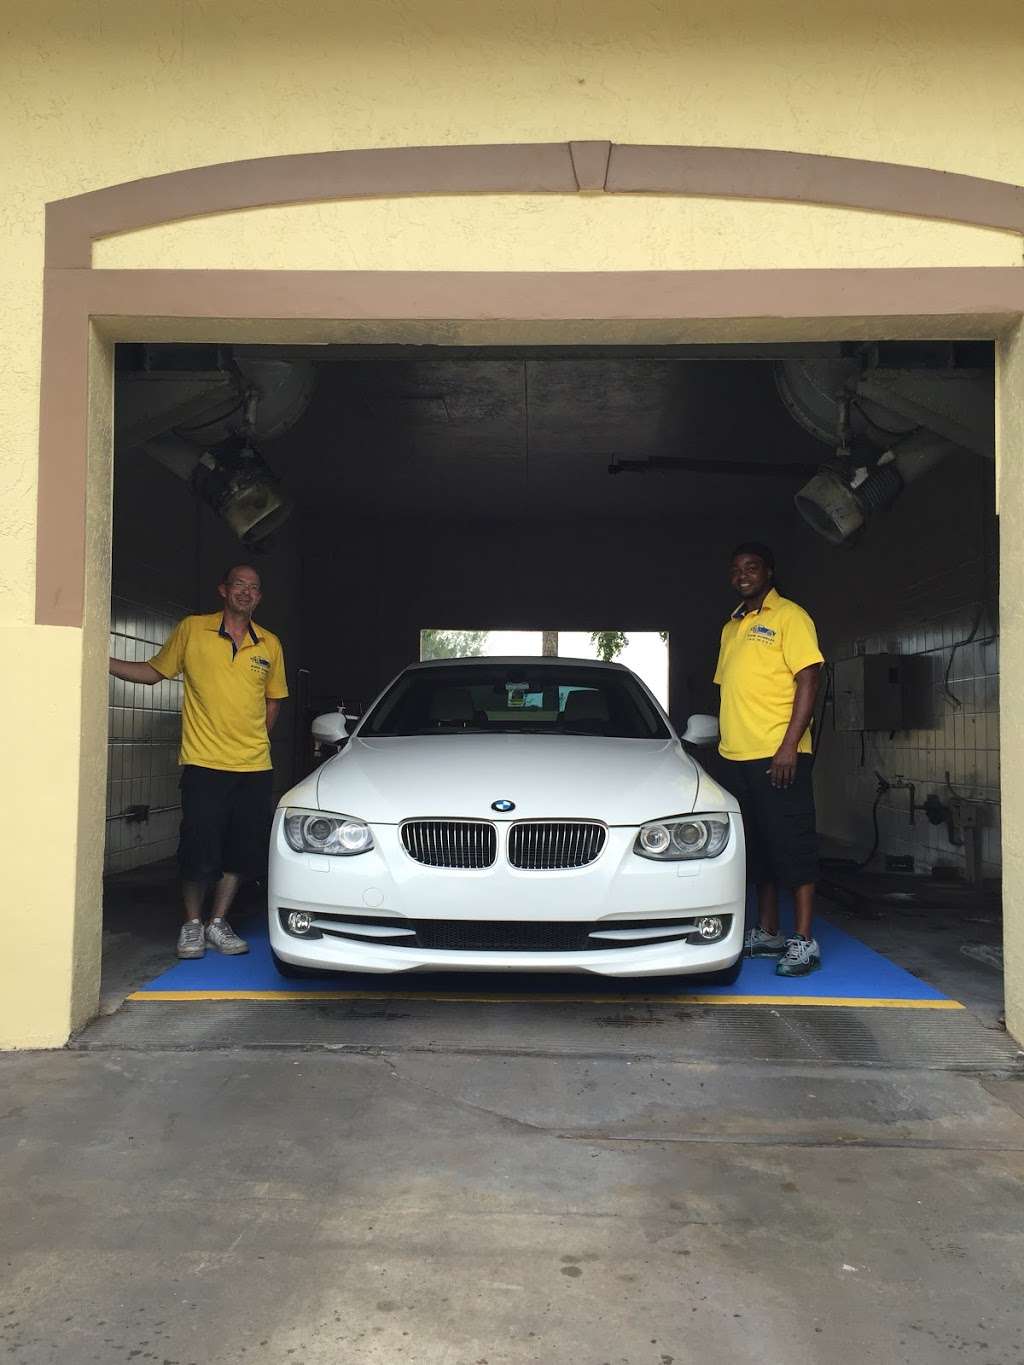 Kwik bubbles | 2290 Coral Springs Dr, Coral Springs, FL 33071 | Phone: (786) 332-9422